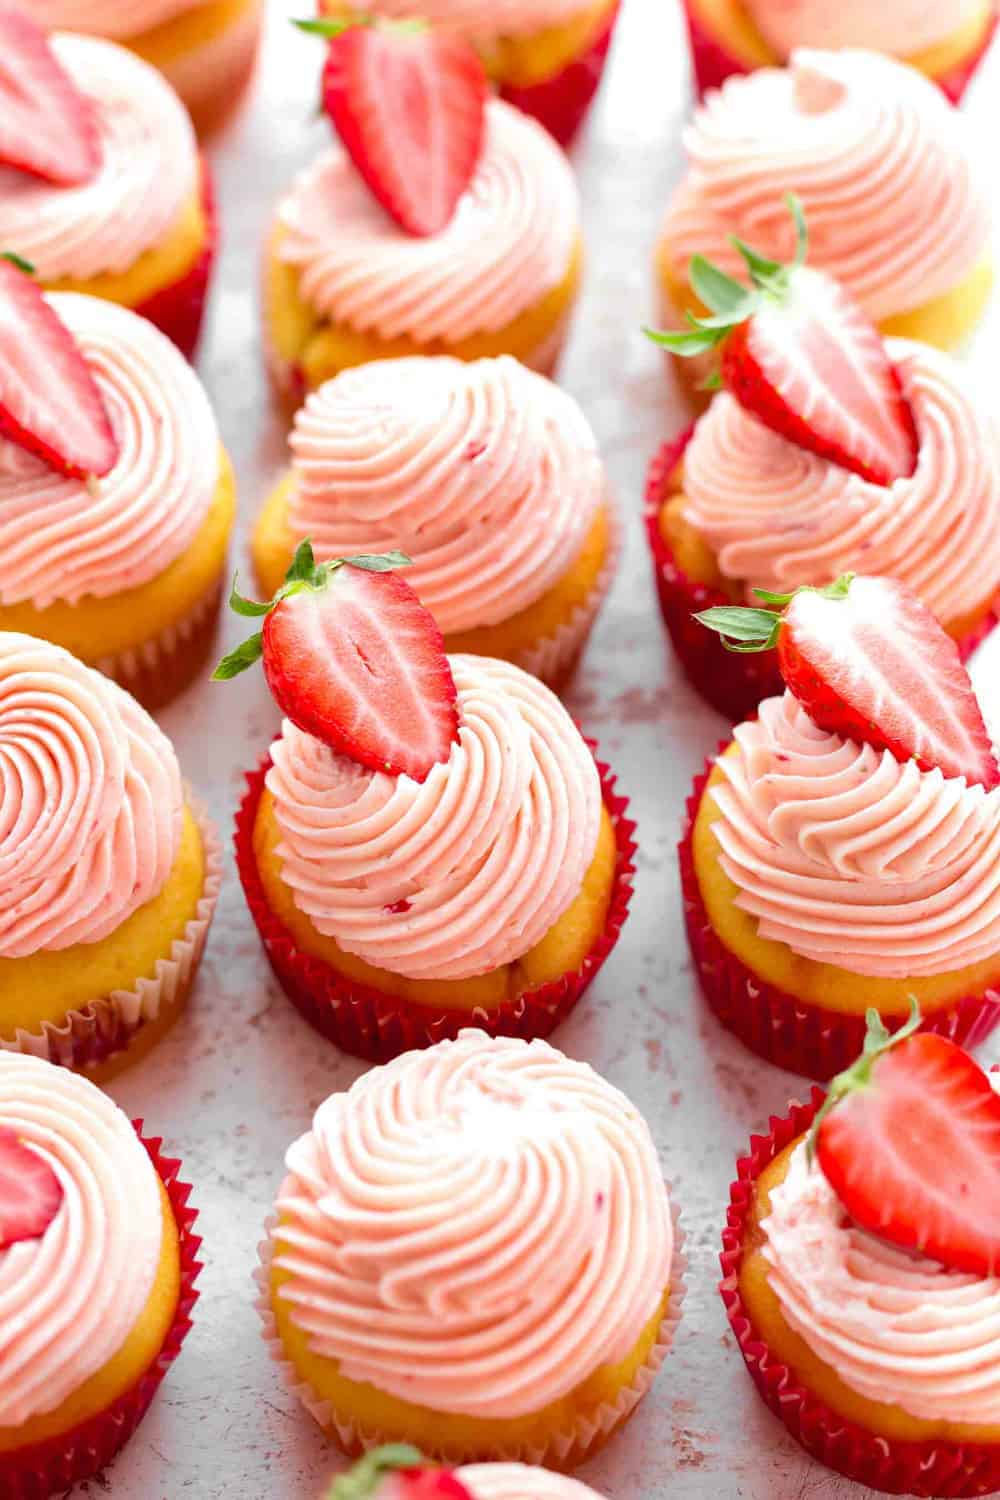 45-degree view of cupcakes topped with strawberry buttercream and halved strawberries on white surface